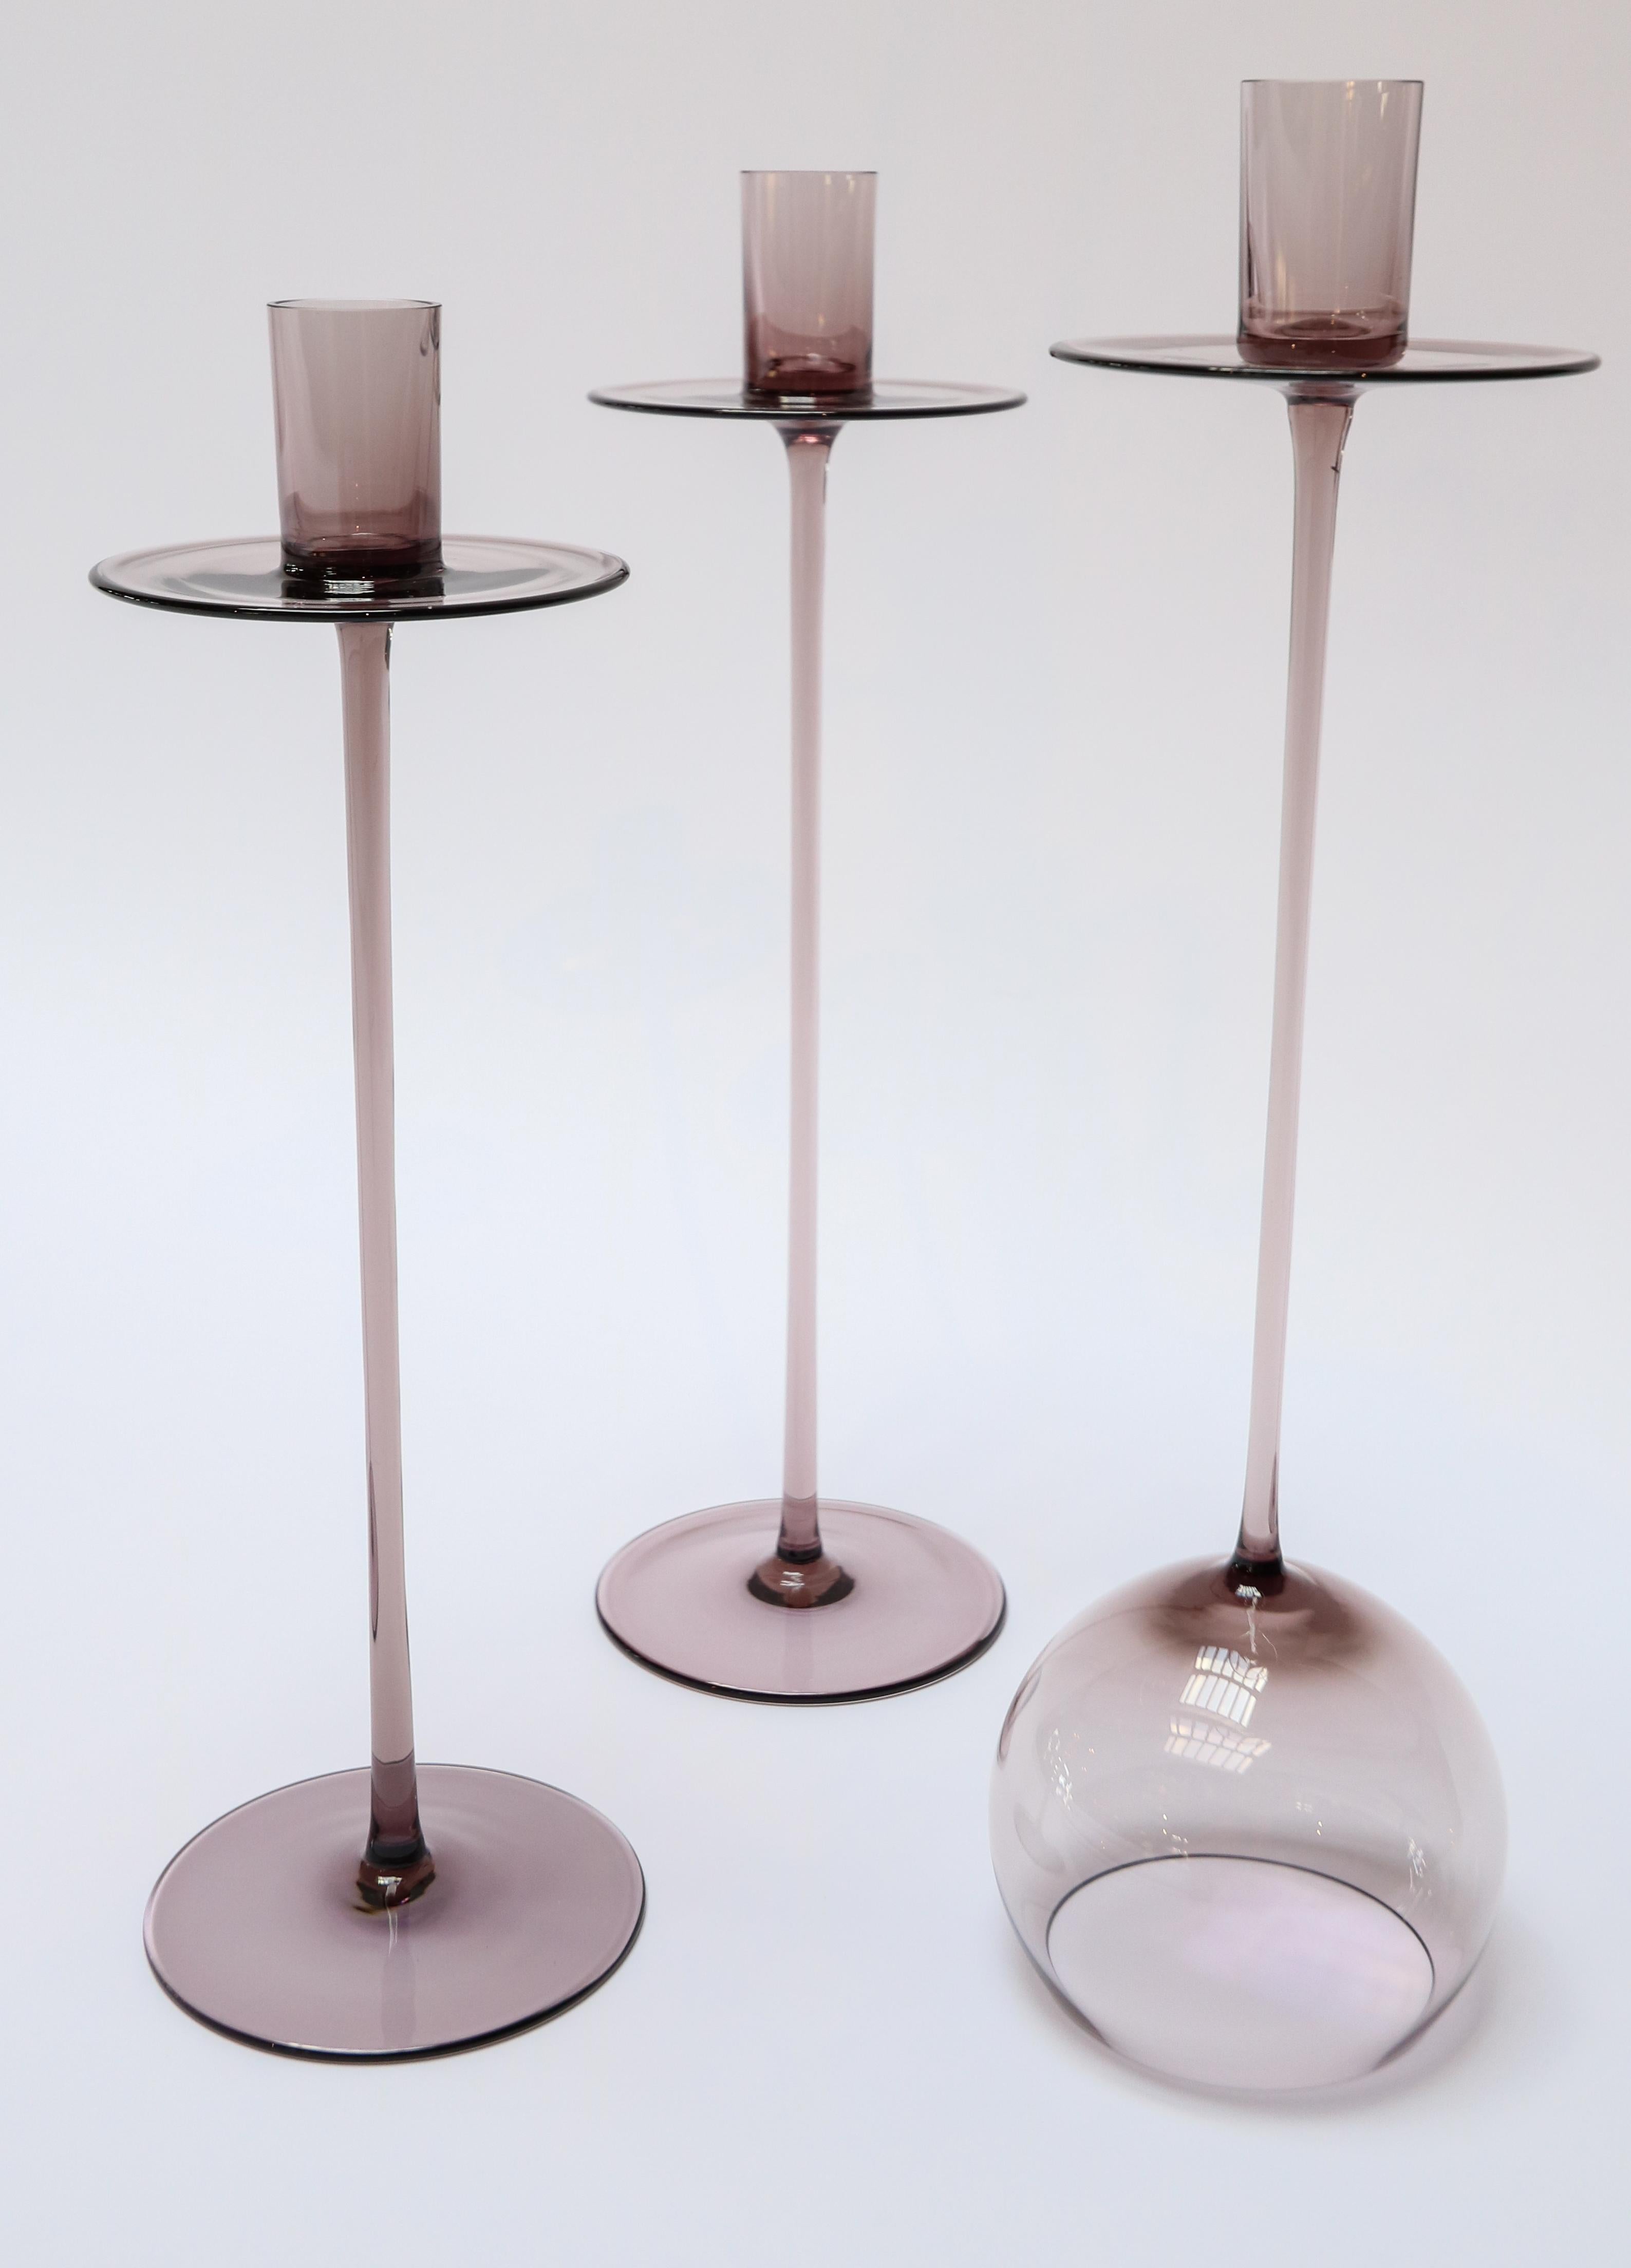 Anna Torfs Tilo glass candlesticks in plum. Available in other colors. Priced individually.

Measures: Tilo candlesticks low (12.75